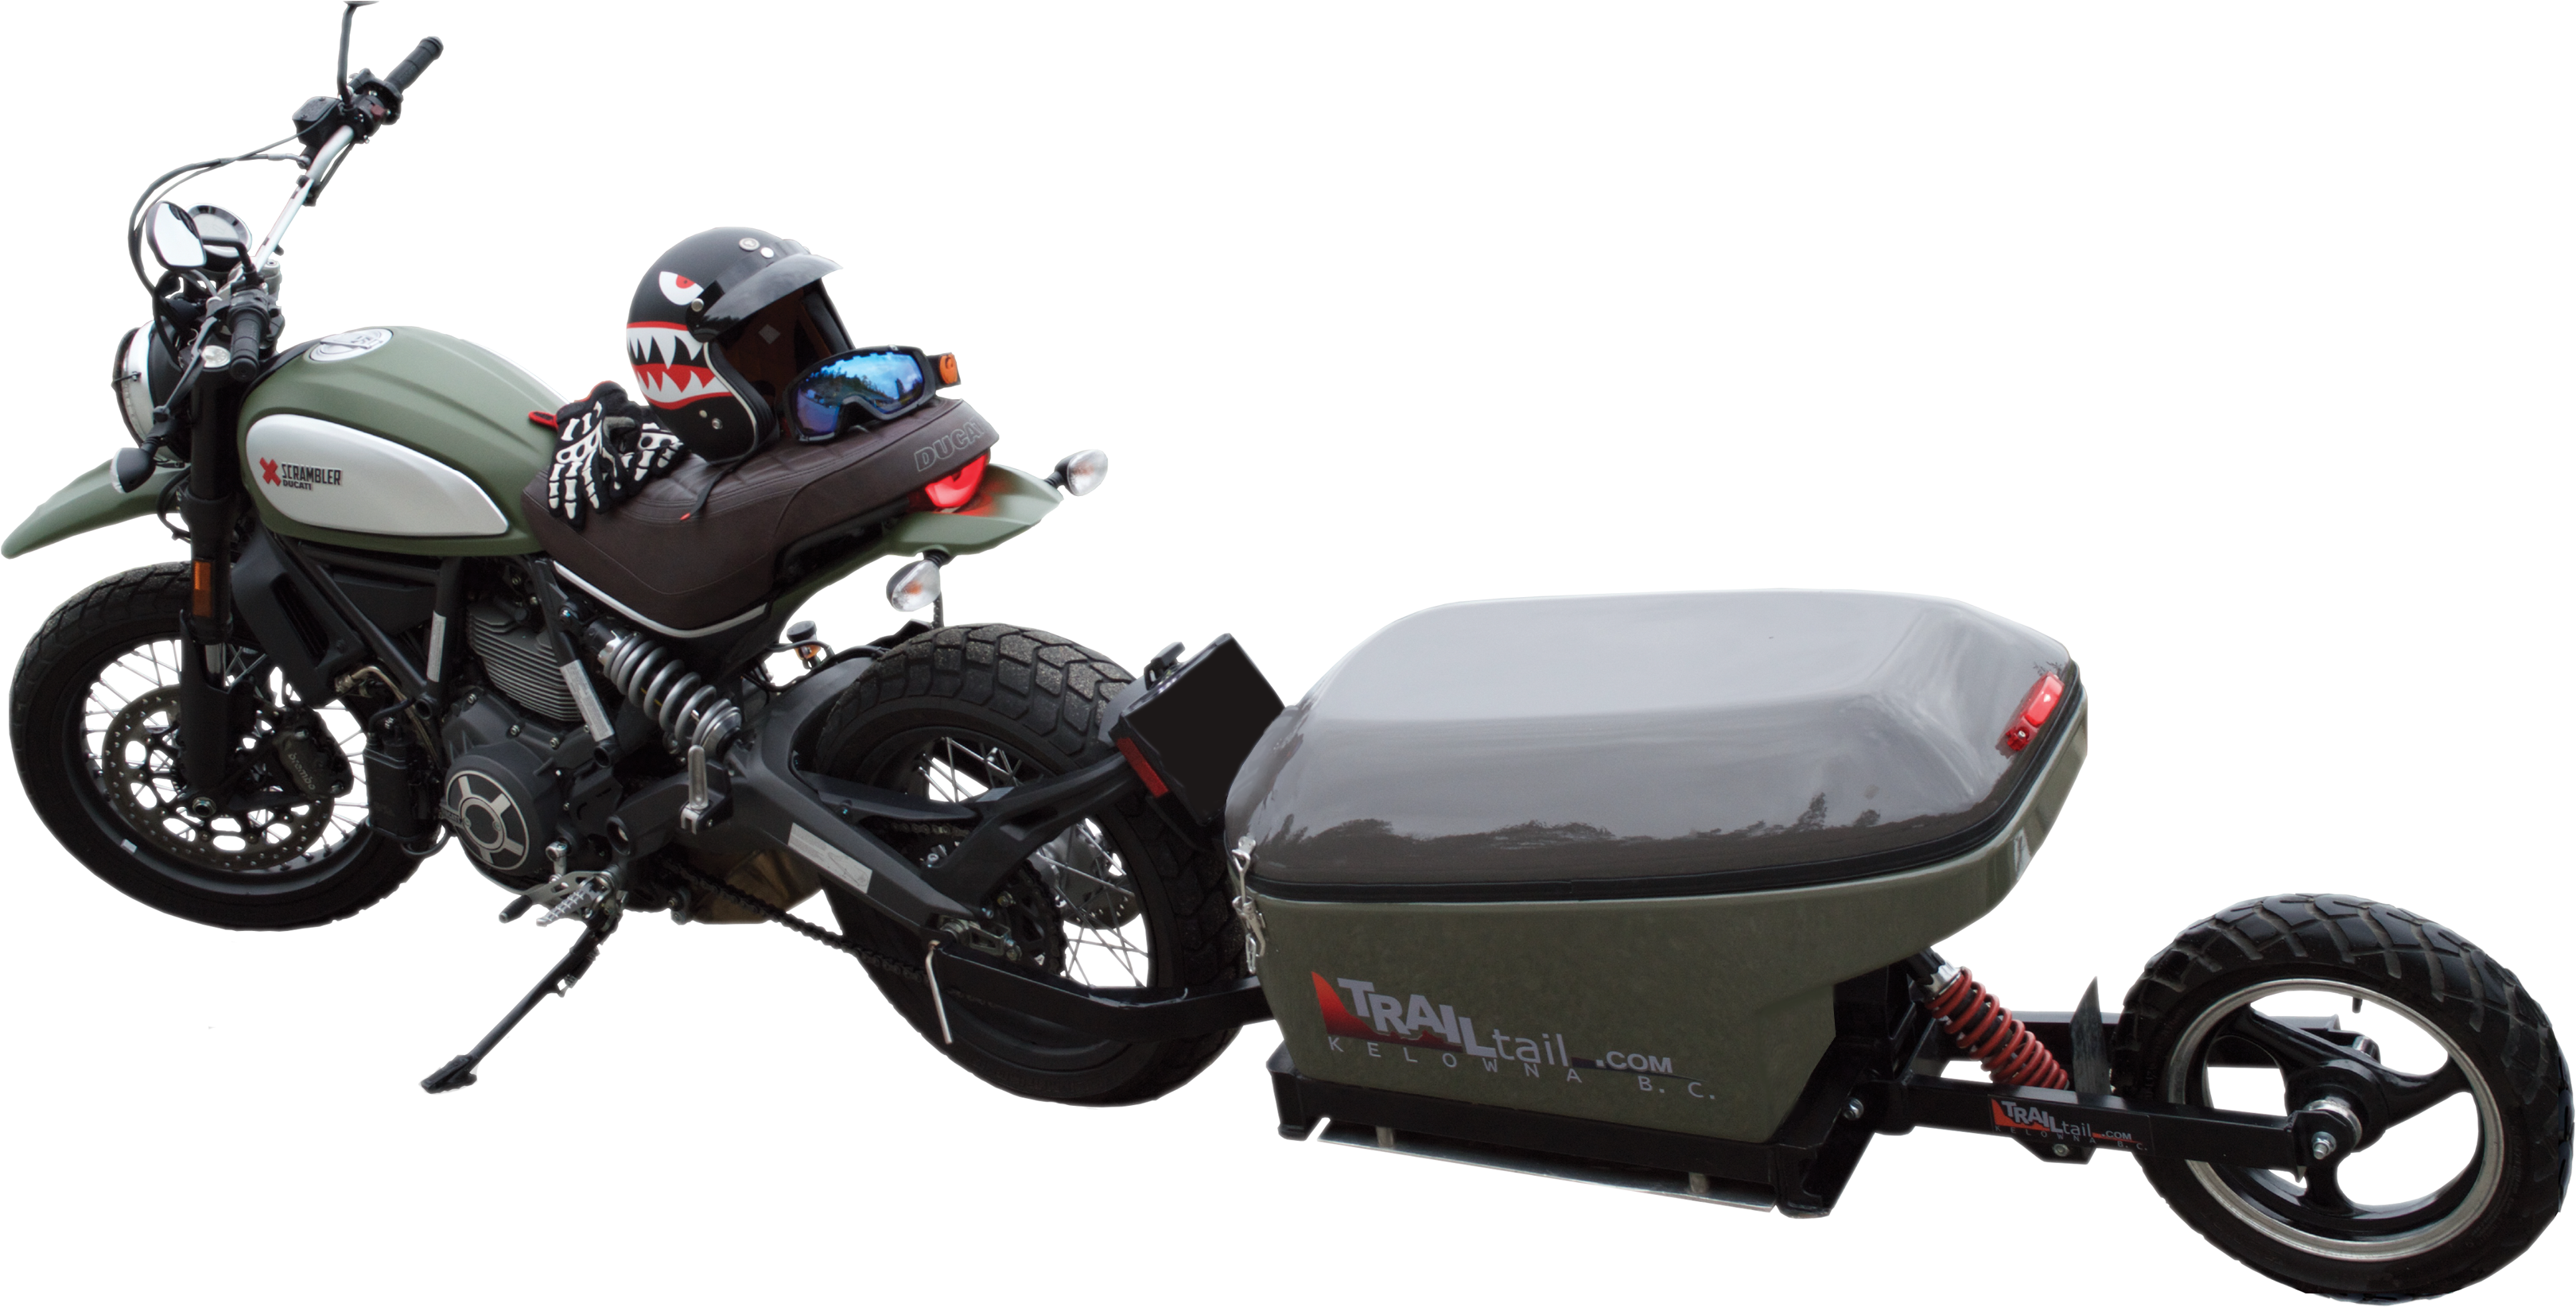 Mortocycle With Trail Tail Trailer Motorcycle Trailer, - Motorcycle Pull Behind Trailer Canada (3463x1691)